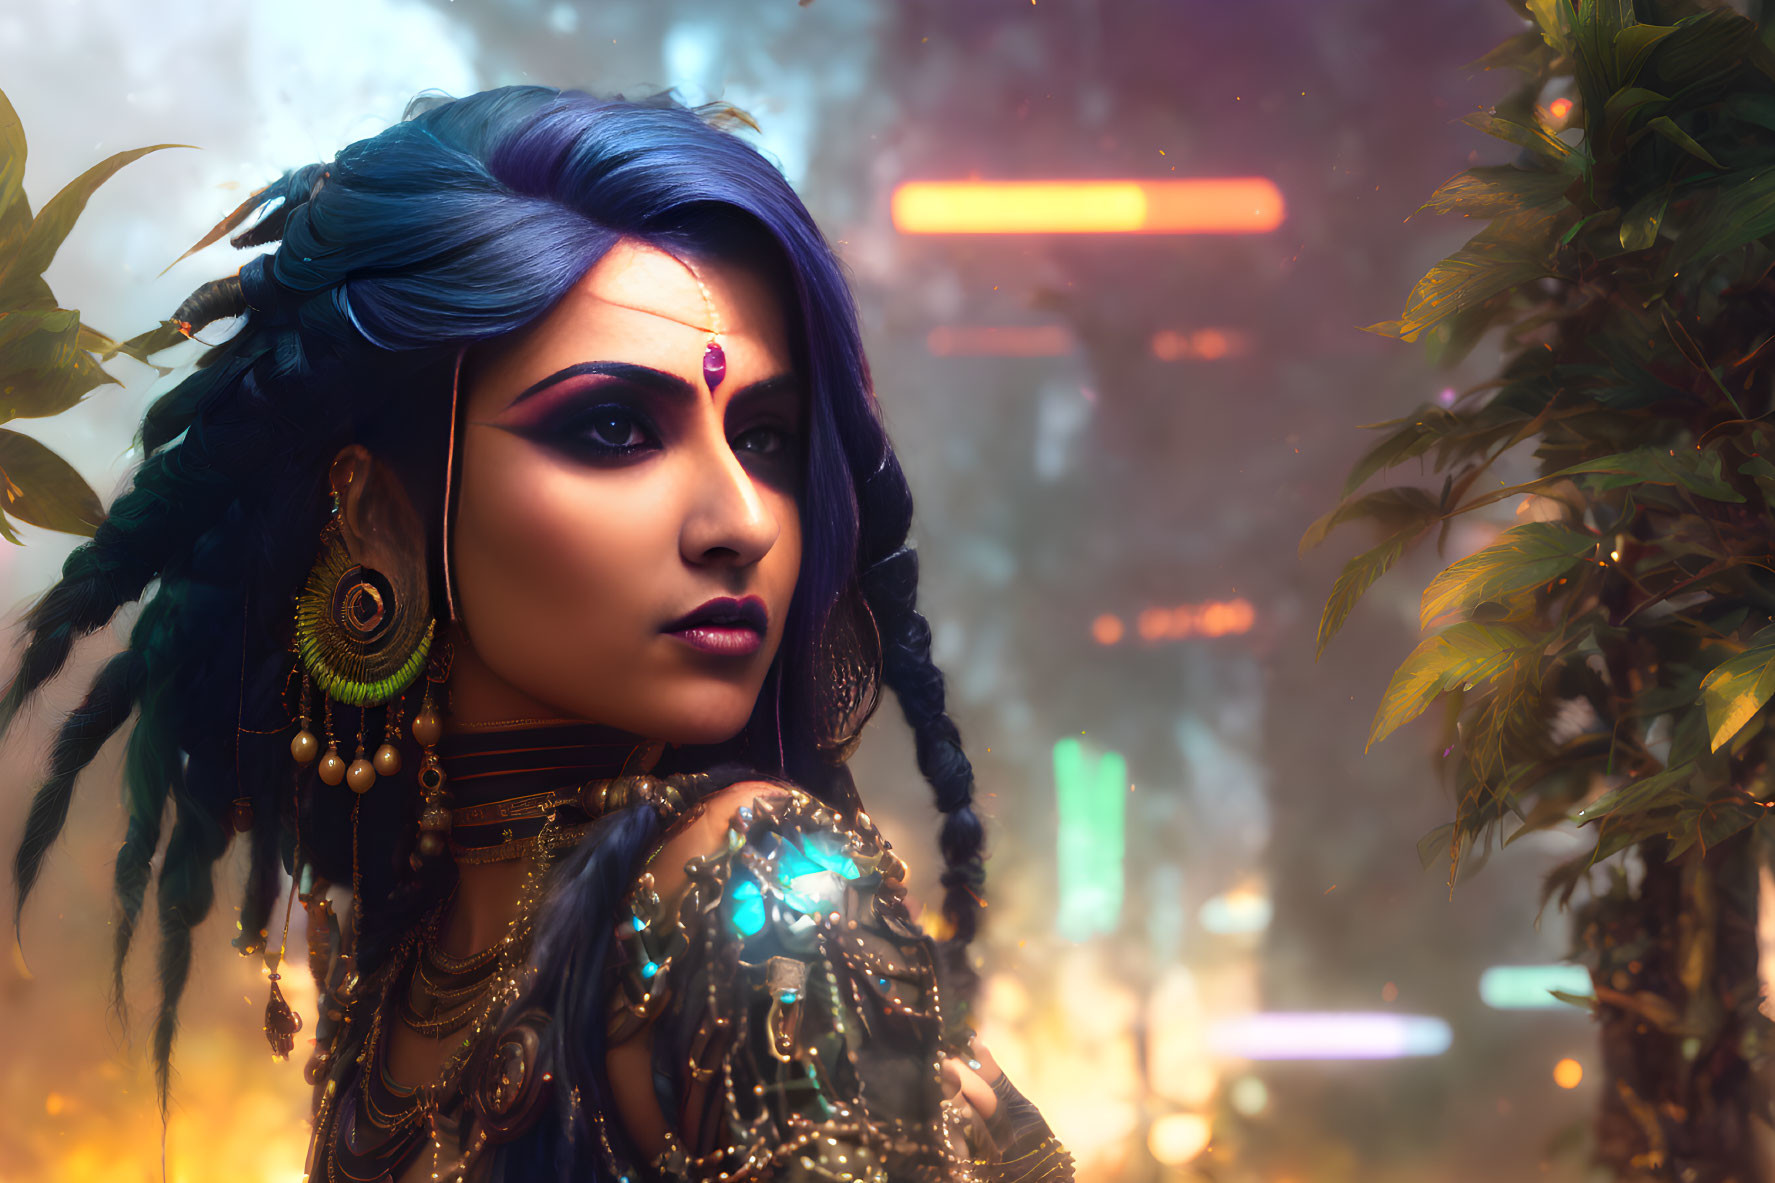 Blue-tinted hair woman in traditional makeup against neon-lit futuristic background